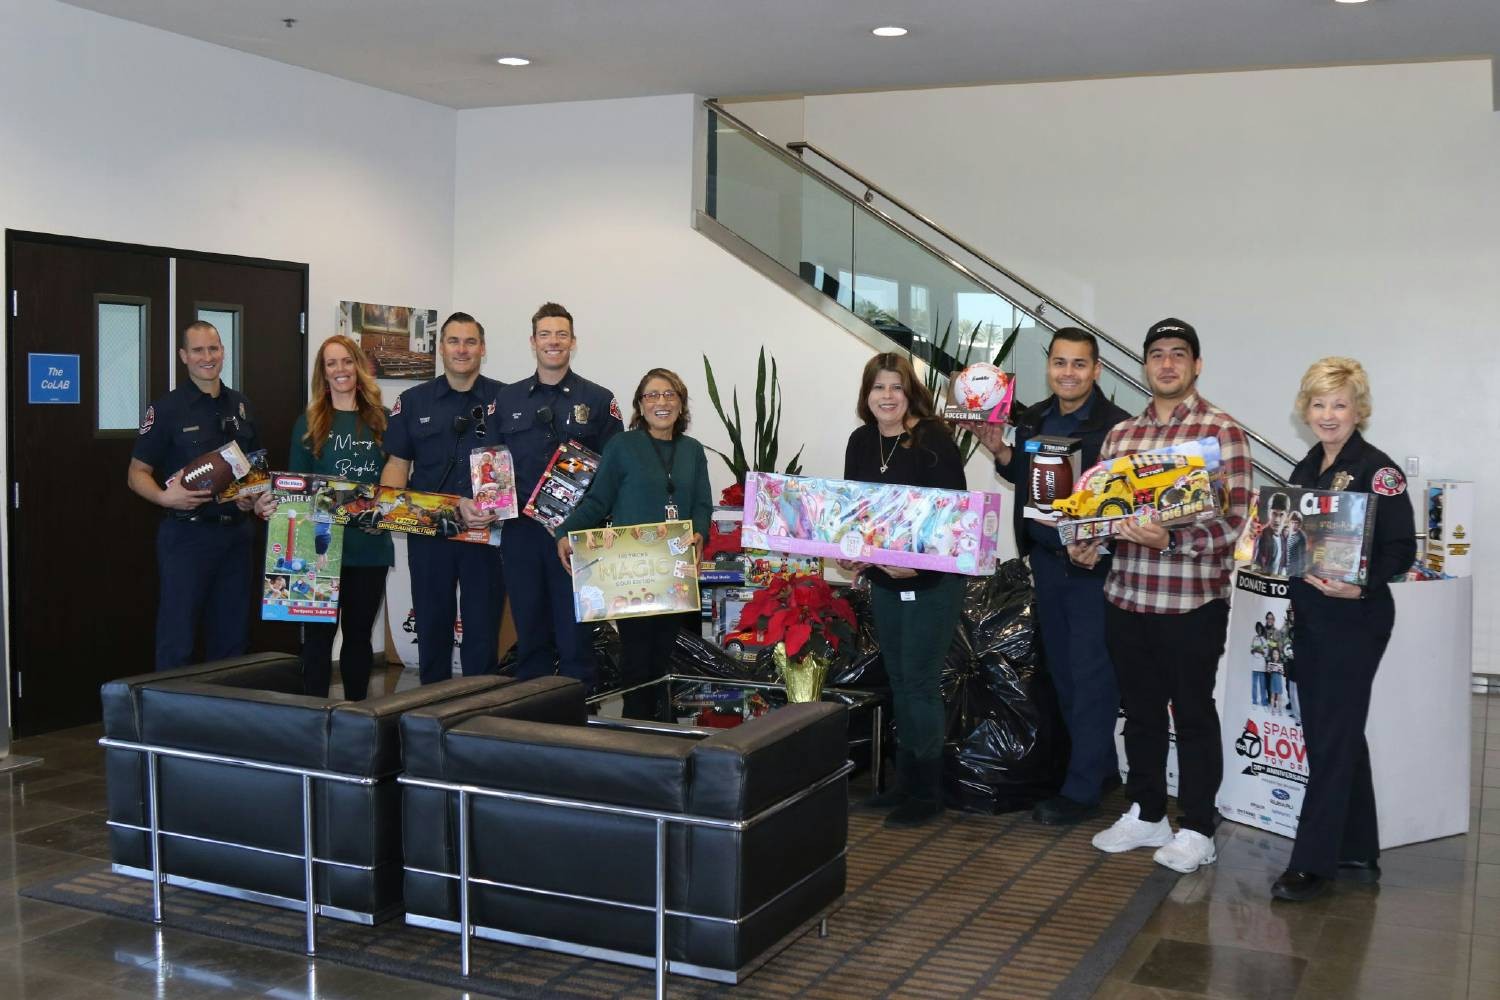 QSC Employees love giving back to the community.  This is our Spark of Love toy drive.